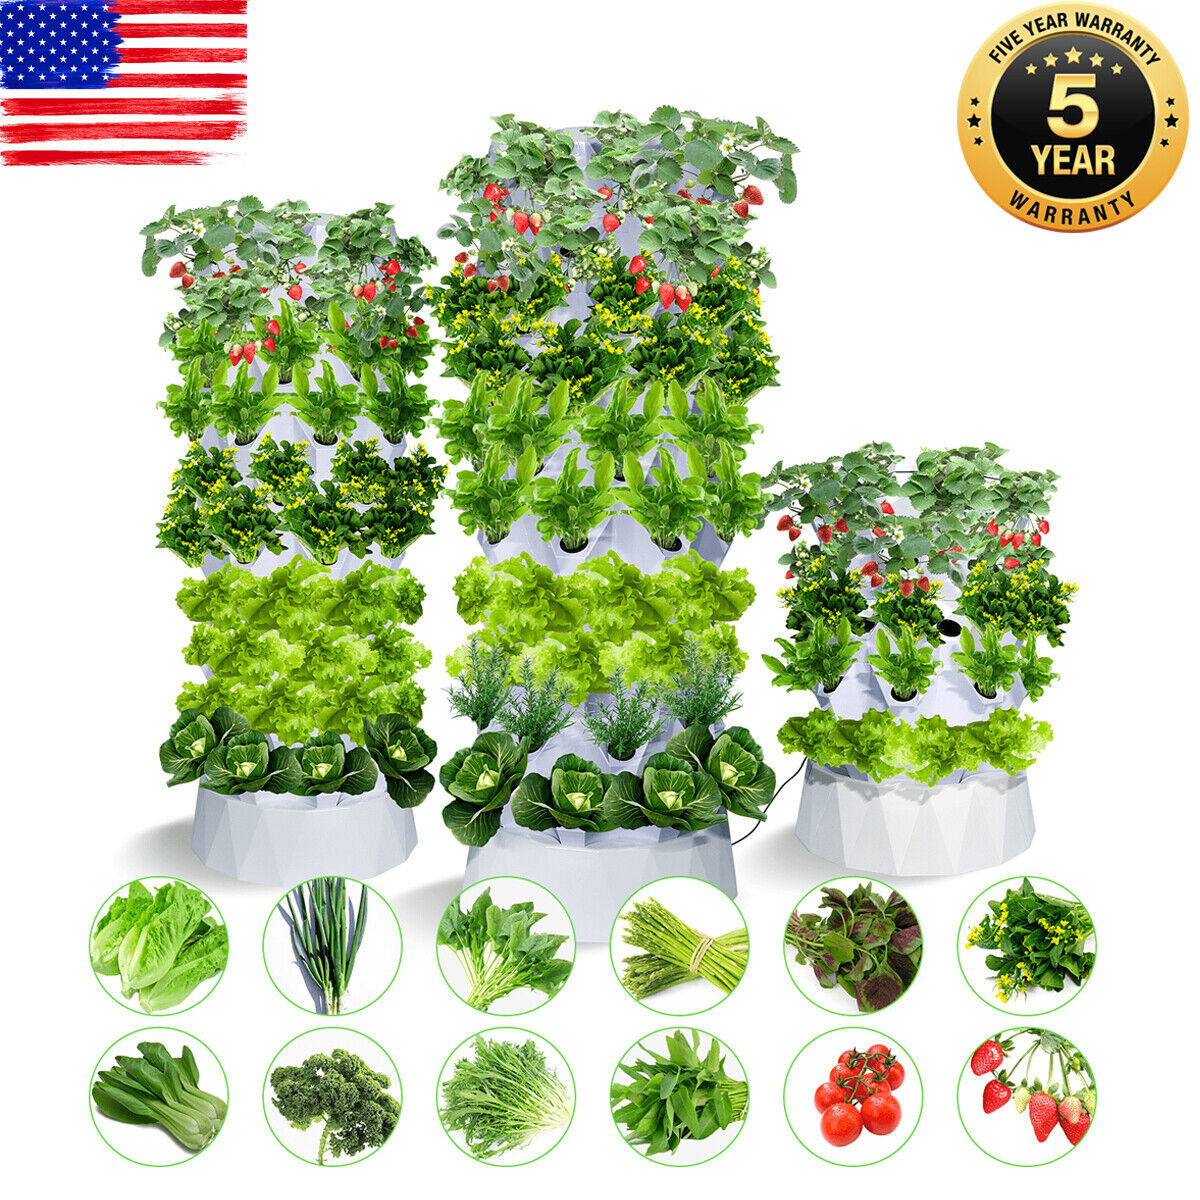 80 Pot Vertical Hydroponics Tower Systems Set Hydroponic Complete Growing Kit US